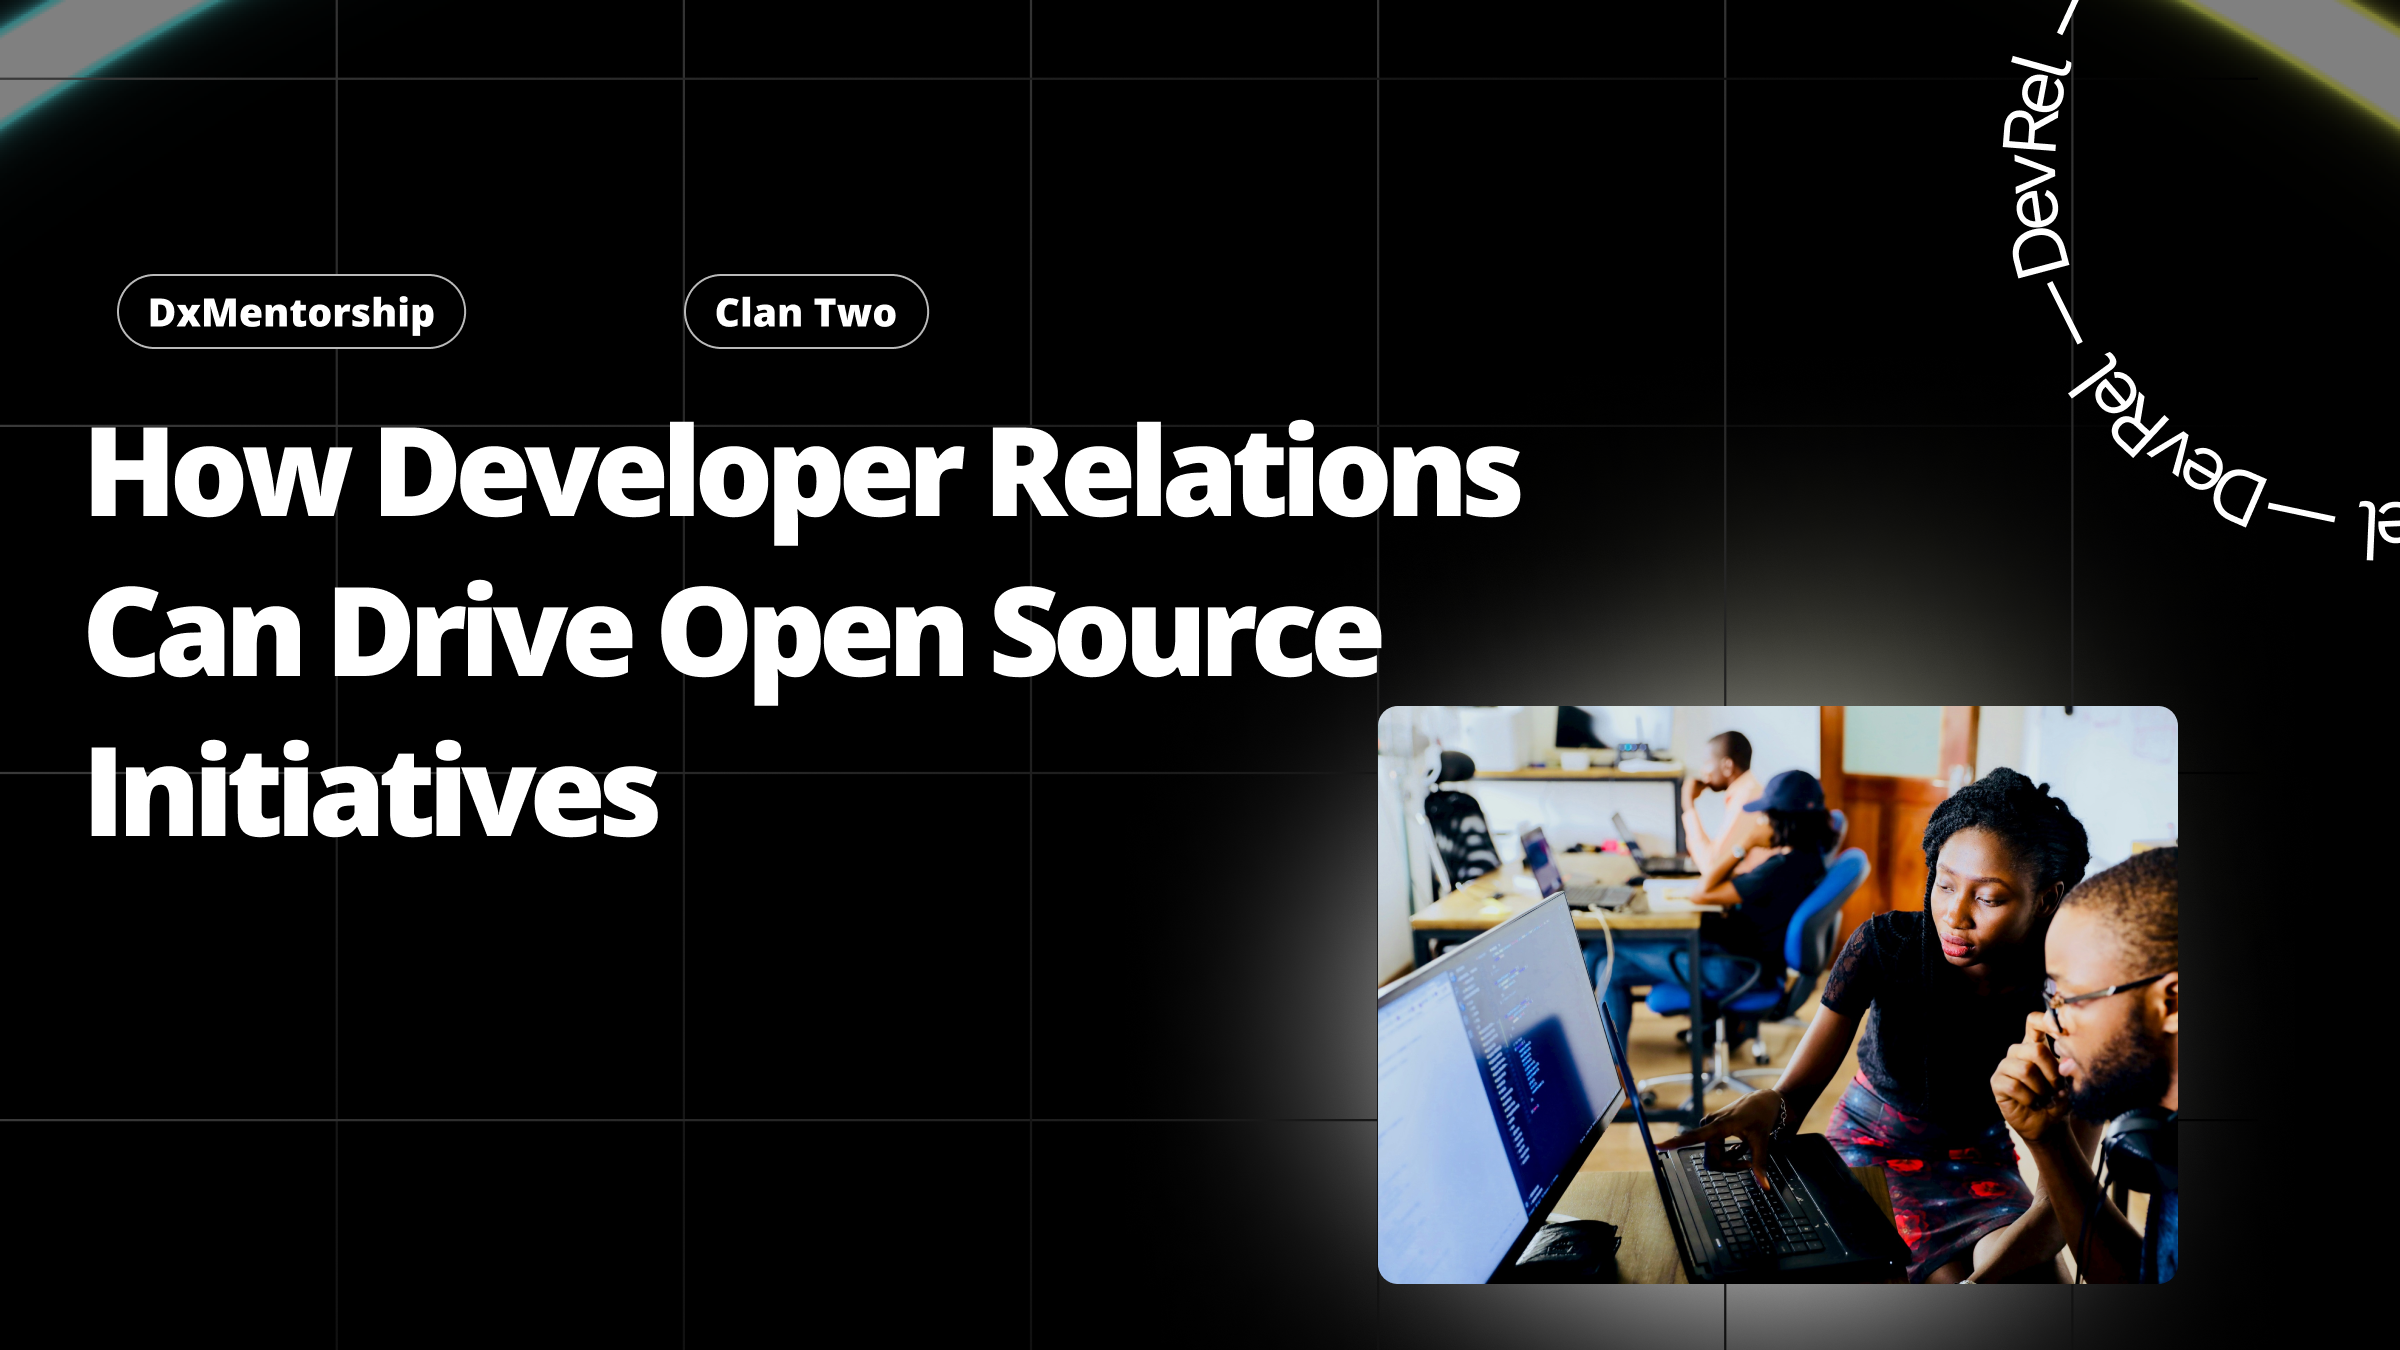 How Developer Relations Can Drive Open Source Initiatives